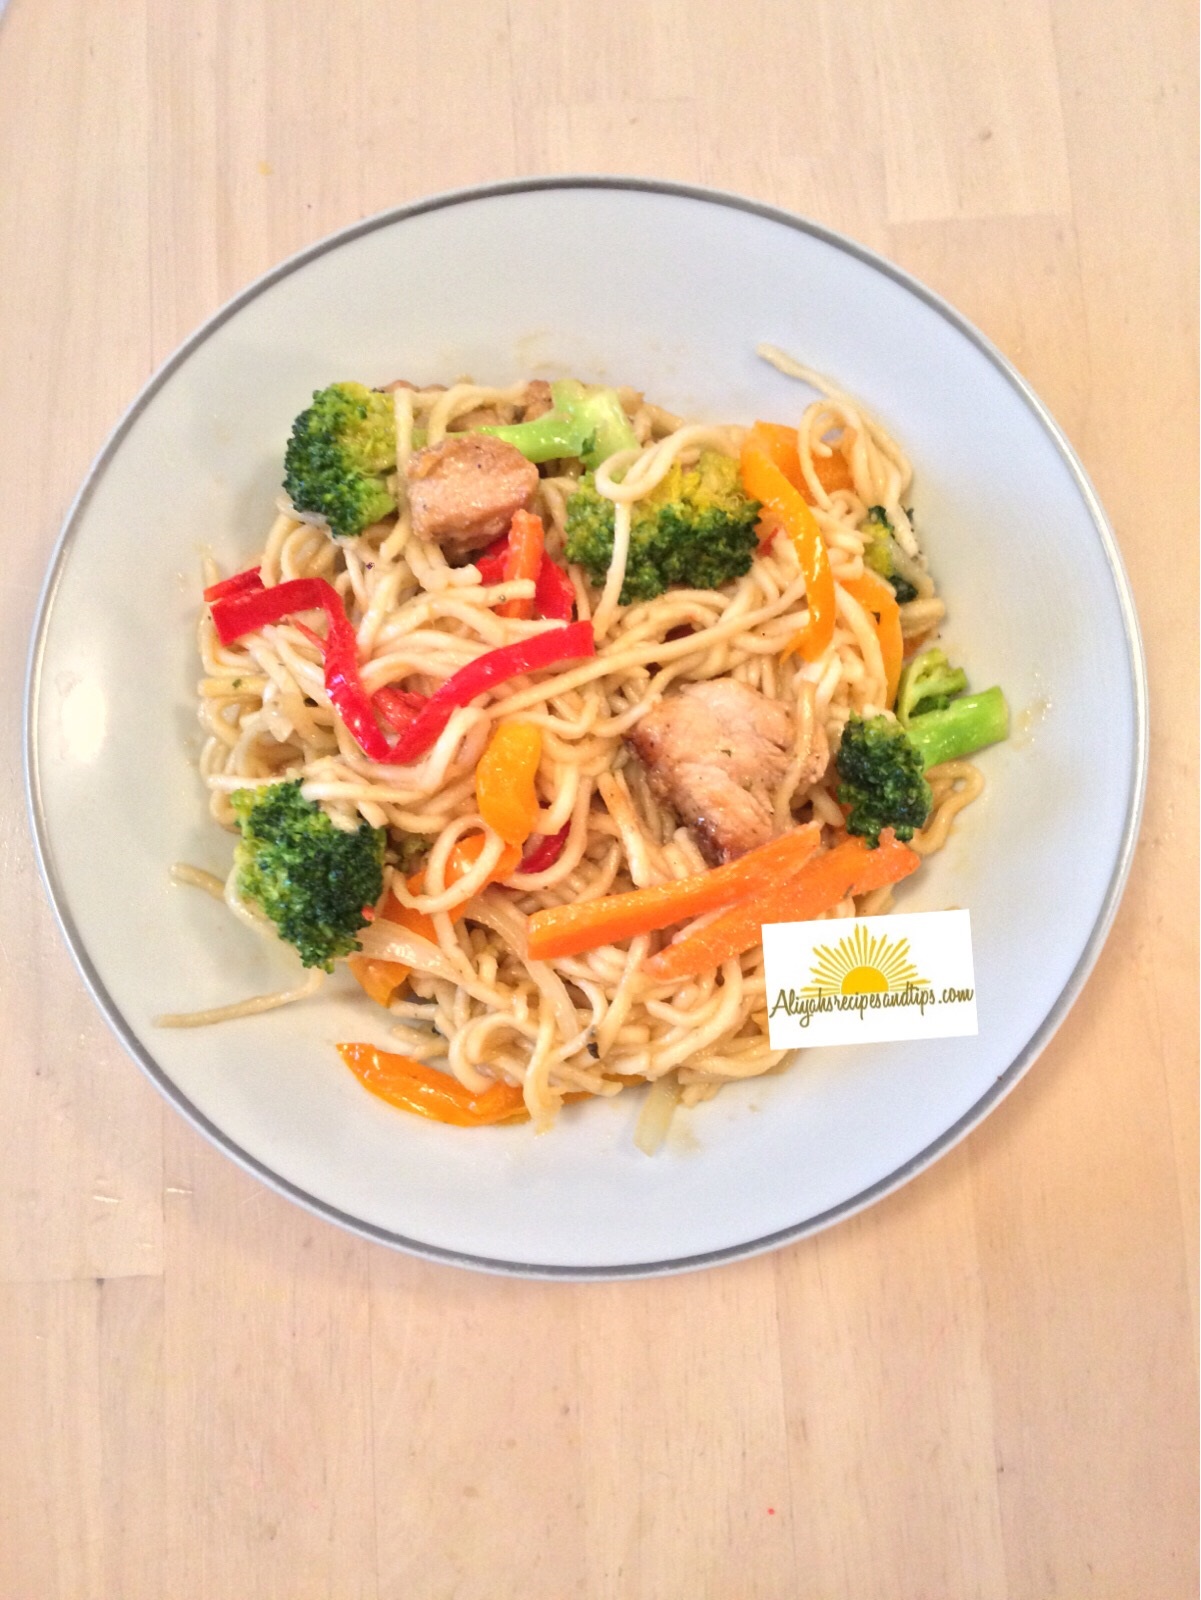 chicken stir fry with noodle served